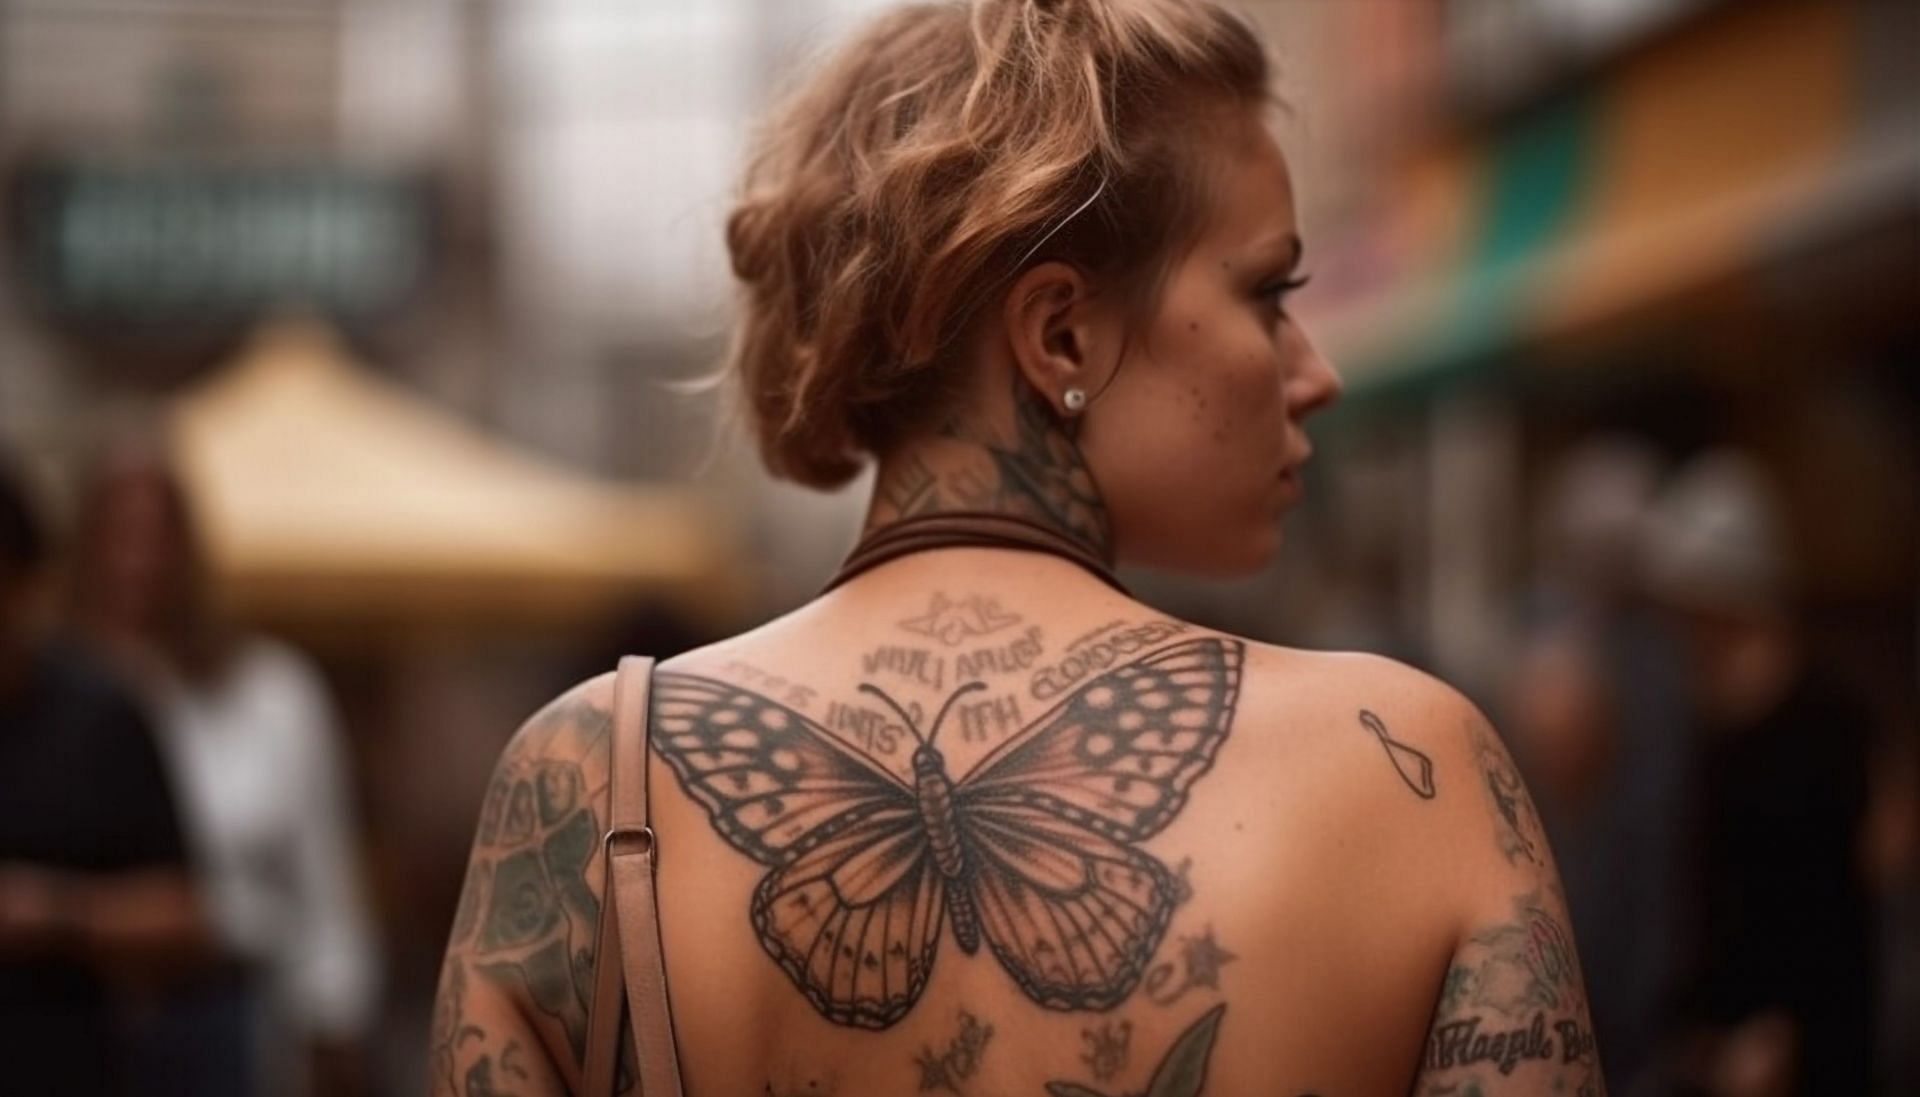 10 Mental Health Tattoos Thatll Empower You To Fight Your Demons